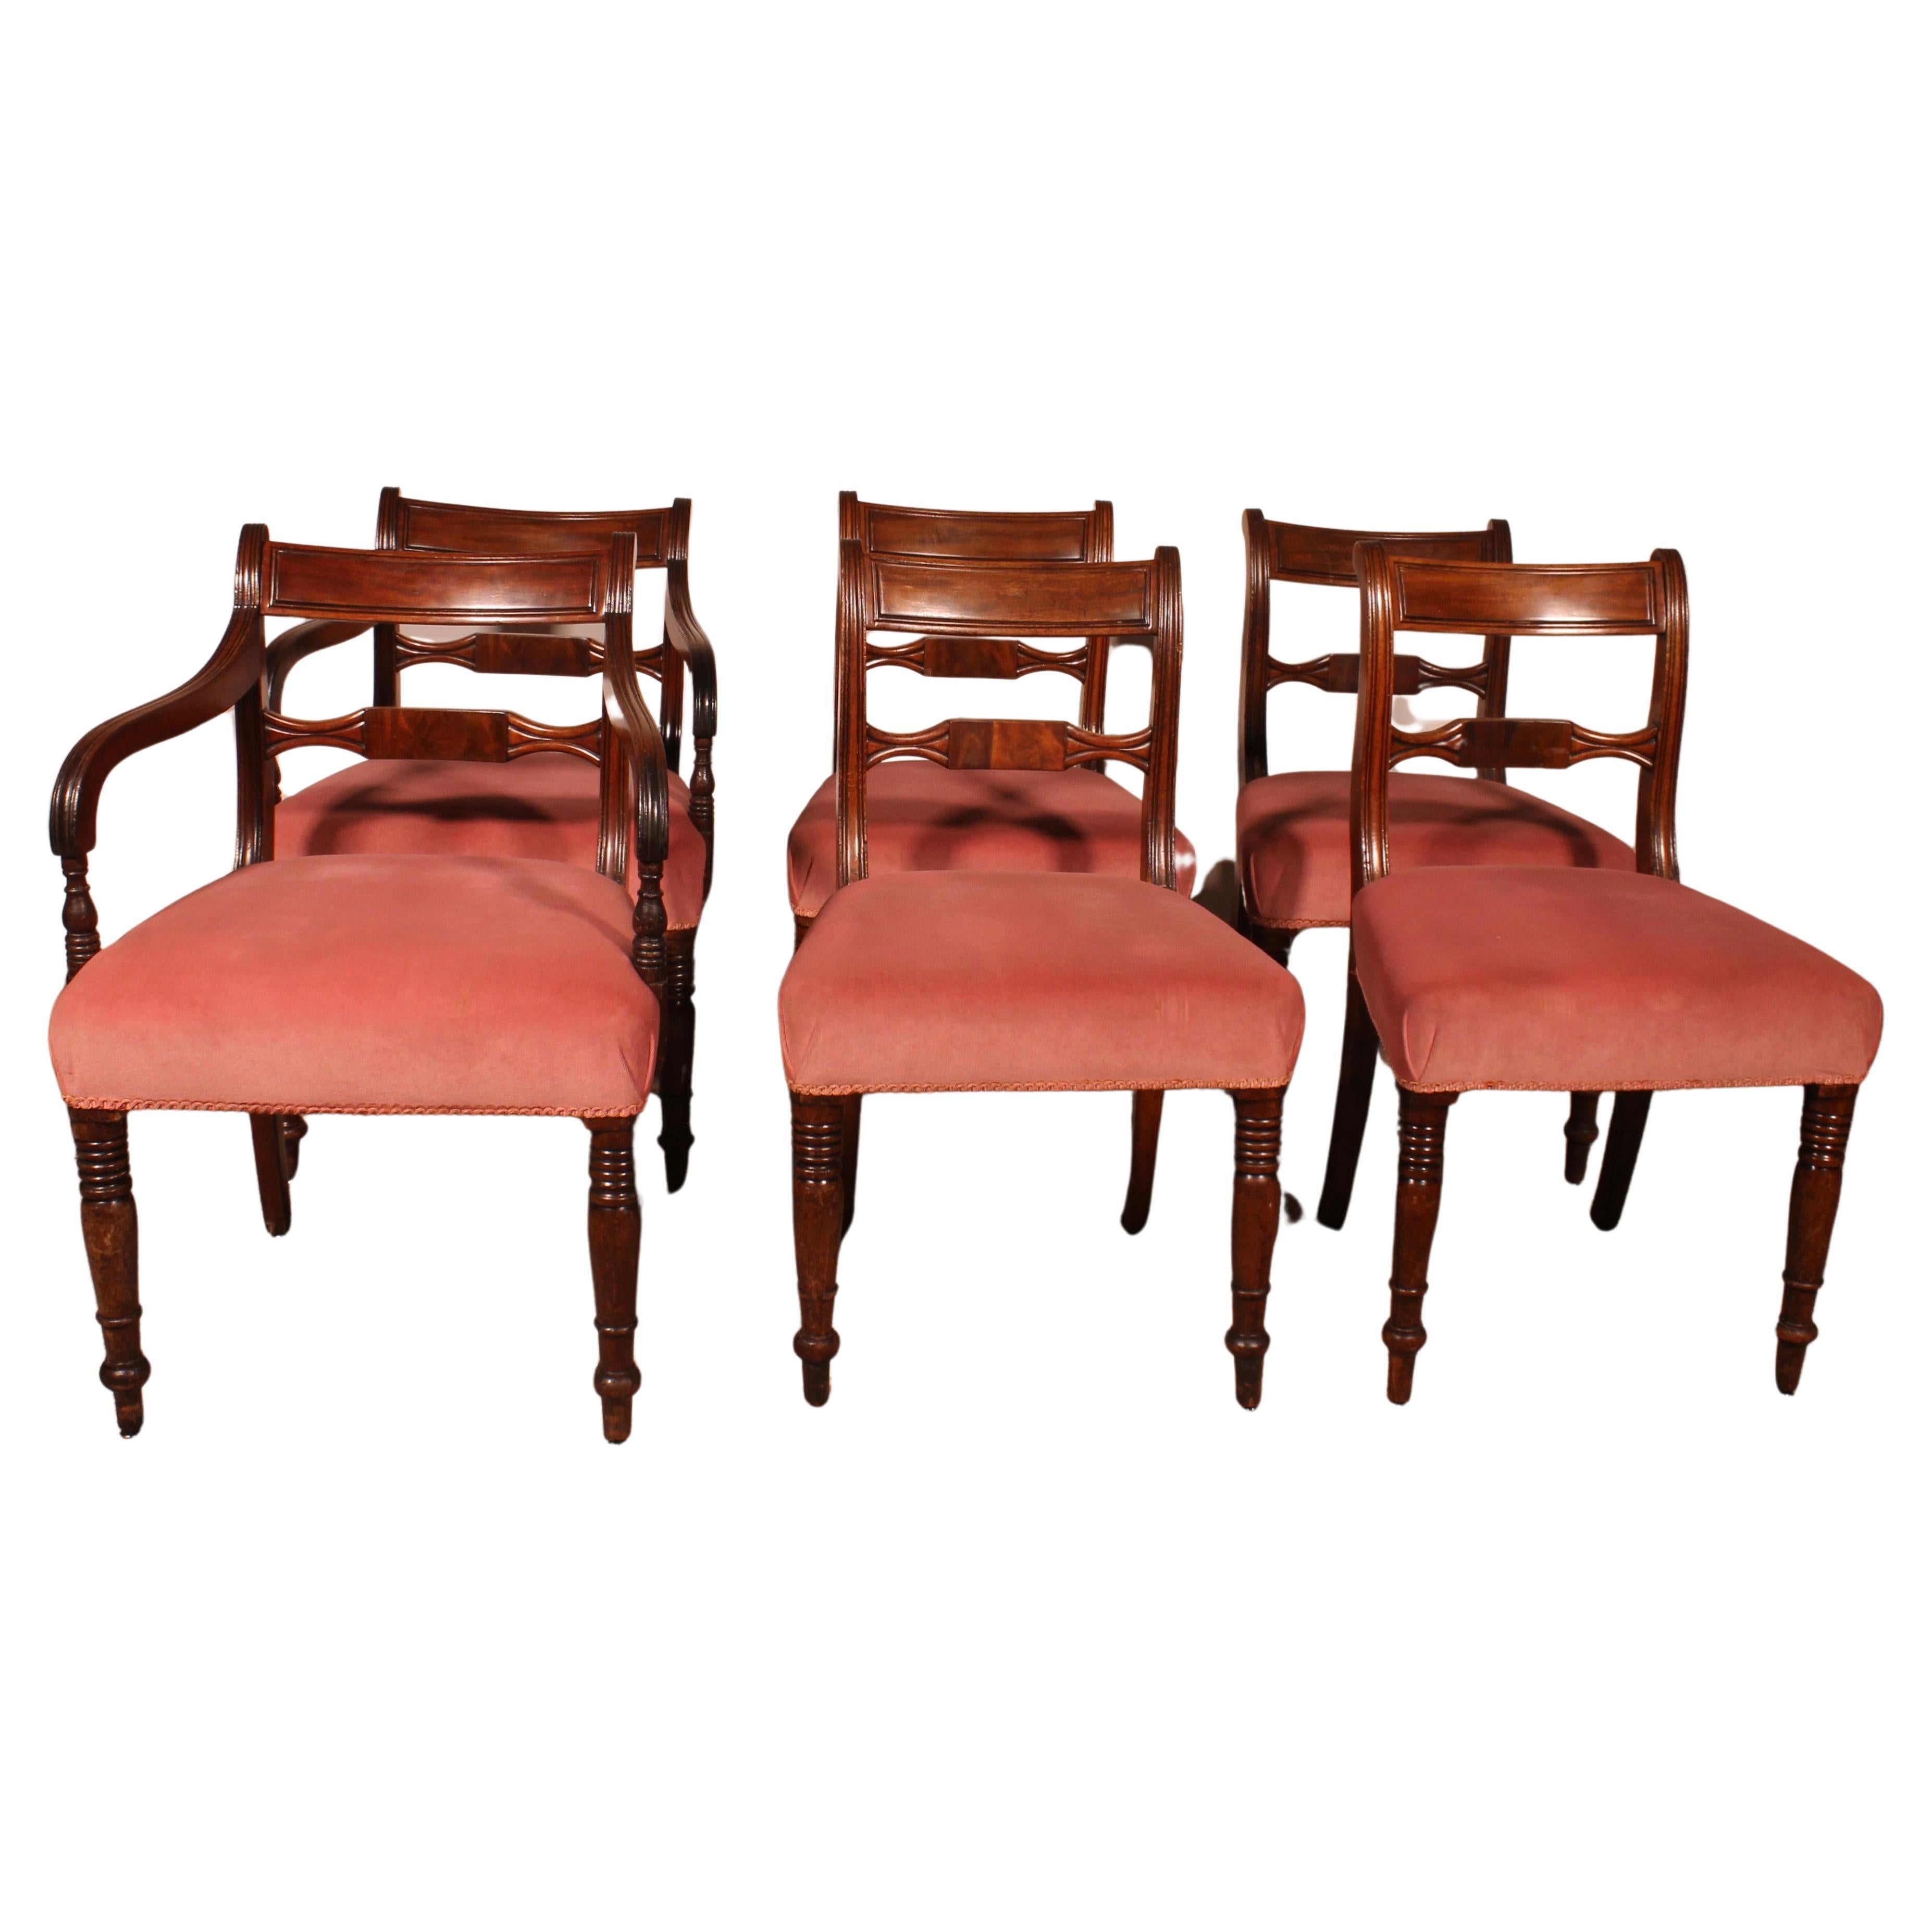 Set Of 4 Chairs And Two Armchairs From The 18th Century In Mahogany For Sale